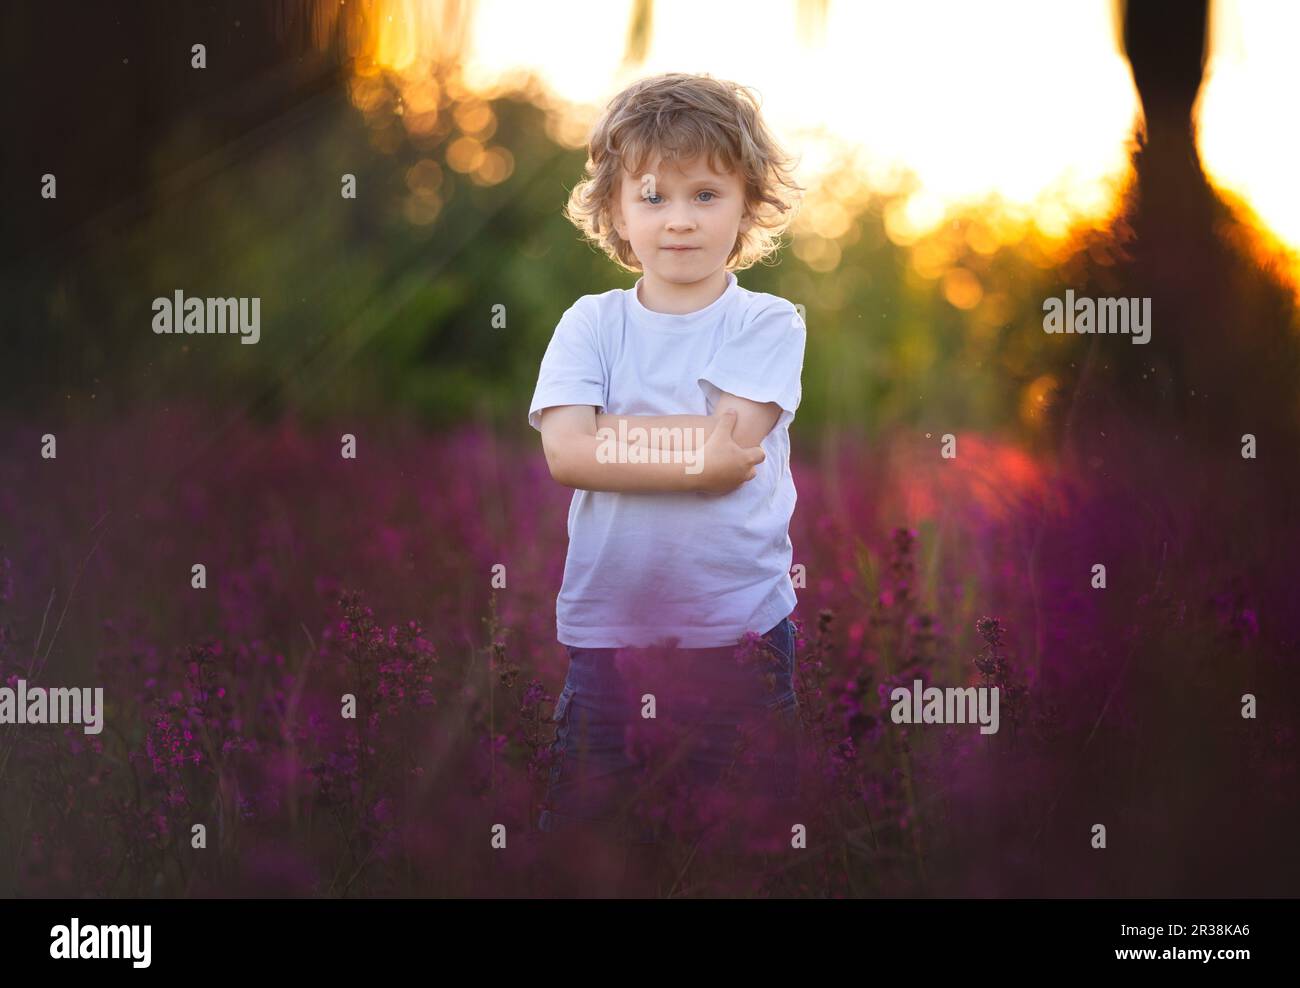 Handscome boy standing in red wildflowers. Serious face and curly hair. Stock Photo